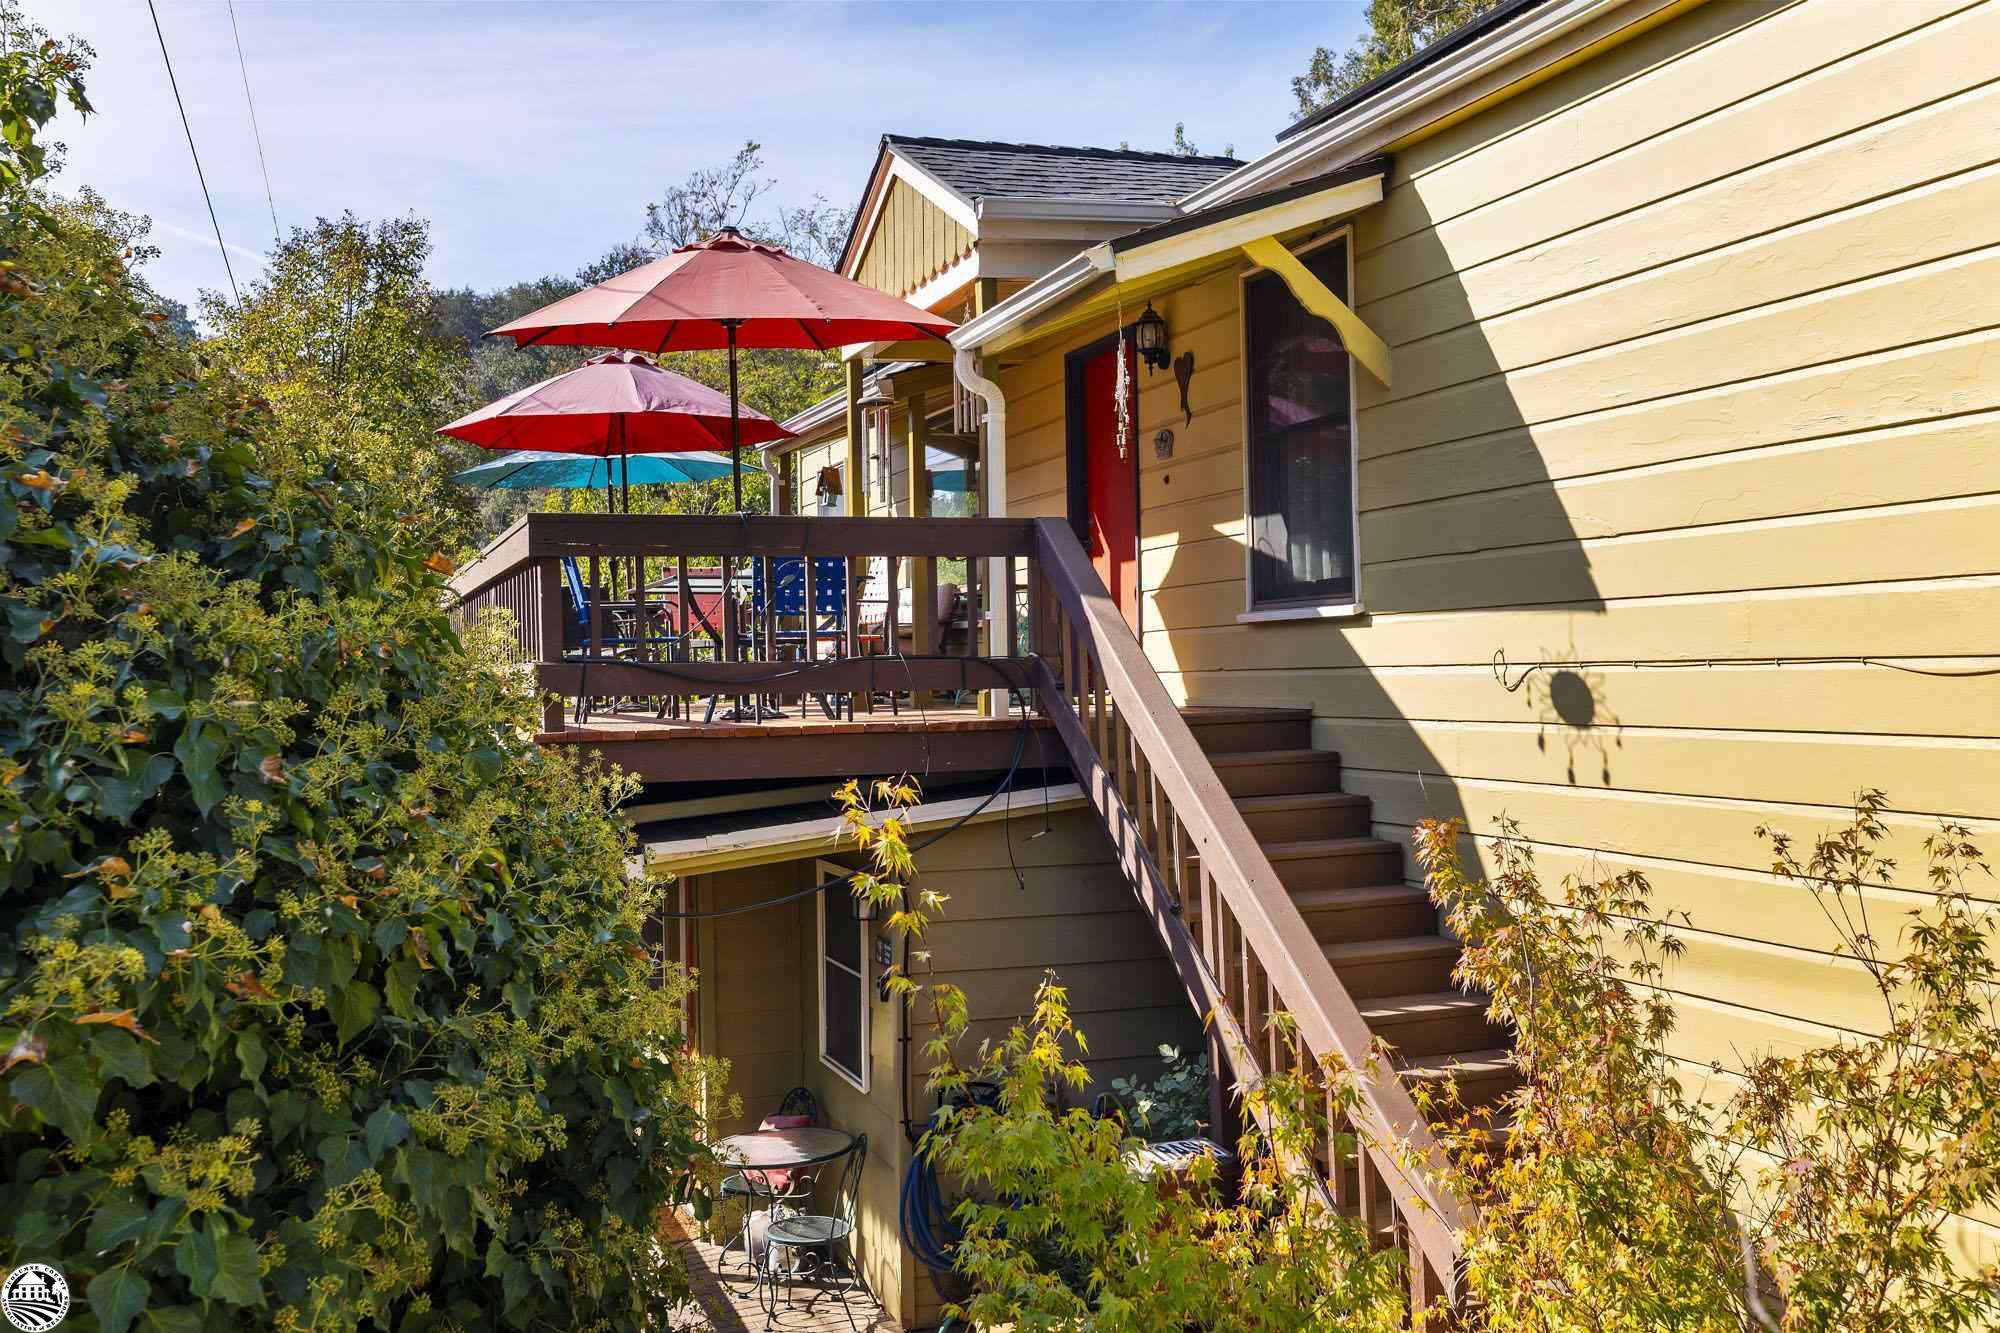 Open House Sunday 1-4pm!!! Artistic and Joyful Vibe in Downtown Sonora. Tucked up off the street, this colorful cottage is a hidden gem. As you walk up on the front deck the cozy view of the trees, the multiple seating areas and the colorful front door set the stage perfectly. Inside, the warmth of the wood floors and touches of wood paneling are a perfect complement to the rooms’ rich paint colors. The main living area opens to a small sitting area on one side, perfect for a reading nook or home office, and on the other side, it opens to the dining room. There is a freestanding propane stove and a large window looking out to the deck that brings in the natural light. The dining room’s high pine ceiling and multiple wood framed windows give the space a real cozy and cottage-like feel. From there, you enter the kitchen which is colorful, vibrant, and pure joy. The white quartz counter tops and stainless-steel appliances are a nice contrast to the vibrant colors and the terracotta-colored tile floor keeps it all very grounded. Off the kitchen is a laundry room/pantry that is very spacious and functional. There are 2 nice-sized bedrooms and a bathroom on the main floor. The downstairs is accessed via stairs off the living room’s sitting area as well as via the lower front yard exterior door. There are 2 sitting areas, a small kitchenette, a sleeping area, and a bathroom with a shower. It can be closed off from the main living area and used as a separate living space, or the door can be opened and used as an extension of the main space. Currently, the owners rent it out for $1,300 per month. What a great way to supplement the mortgage if you don’t need the extra space! In addition to the space in the home, there are also a detached office and a detached artist studio on the property. The backyard is magical with charming rock walls and stairs meandering through the yard’s multiple sitting areas and well-established foliage. It is peaceful, private, and absolutely dreamy. There is also a roof top garden/sitting area over the detached garage. The property goes from street to street and there is an off-street parking space on Oakside. Located on Myers Hill, you cannot beat the location and its proximity to the farmer’s market, shops, and restaurants. Check out the 3D tour to appreciate all this home has to offer.